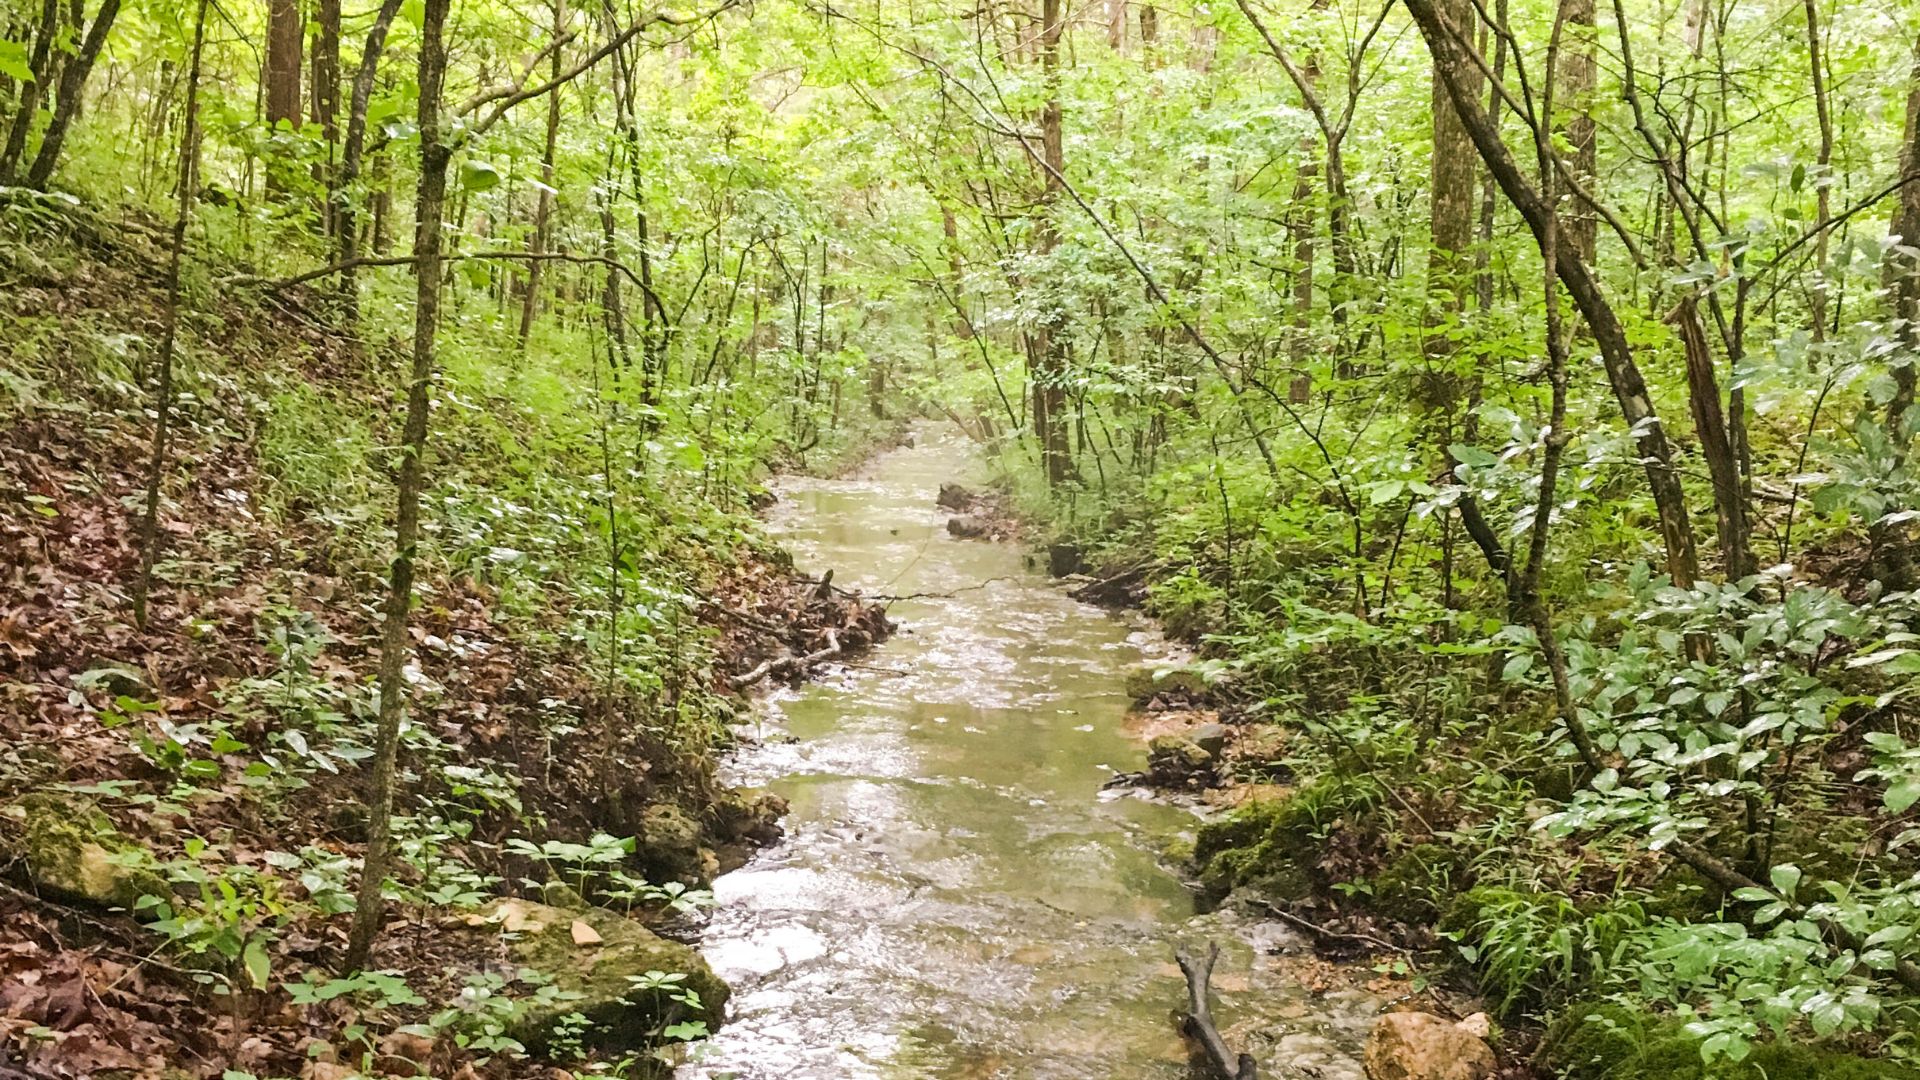 Rippling creek in the springtime surrounded by trees sprouting new green growth.